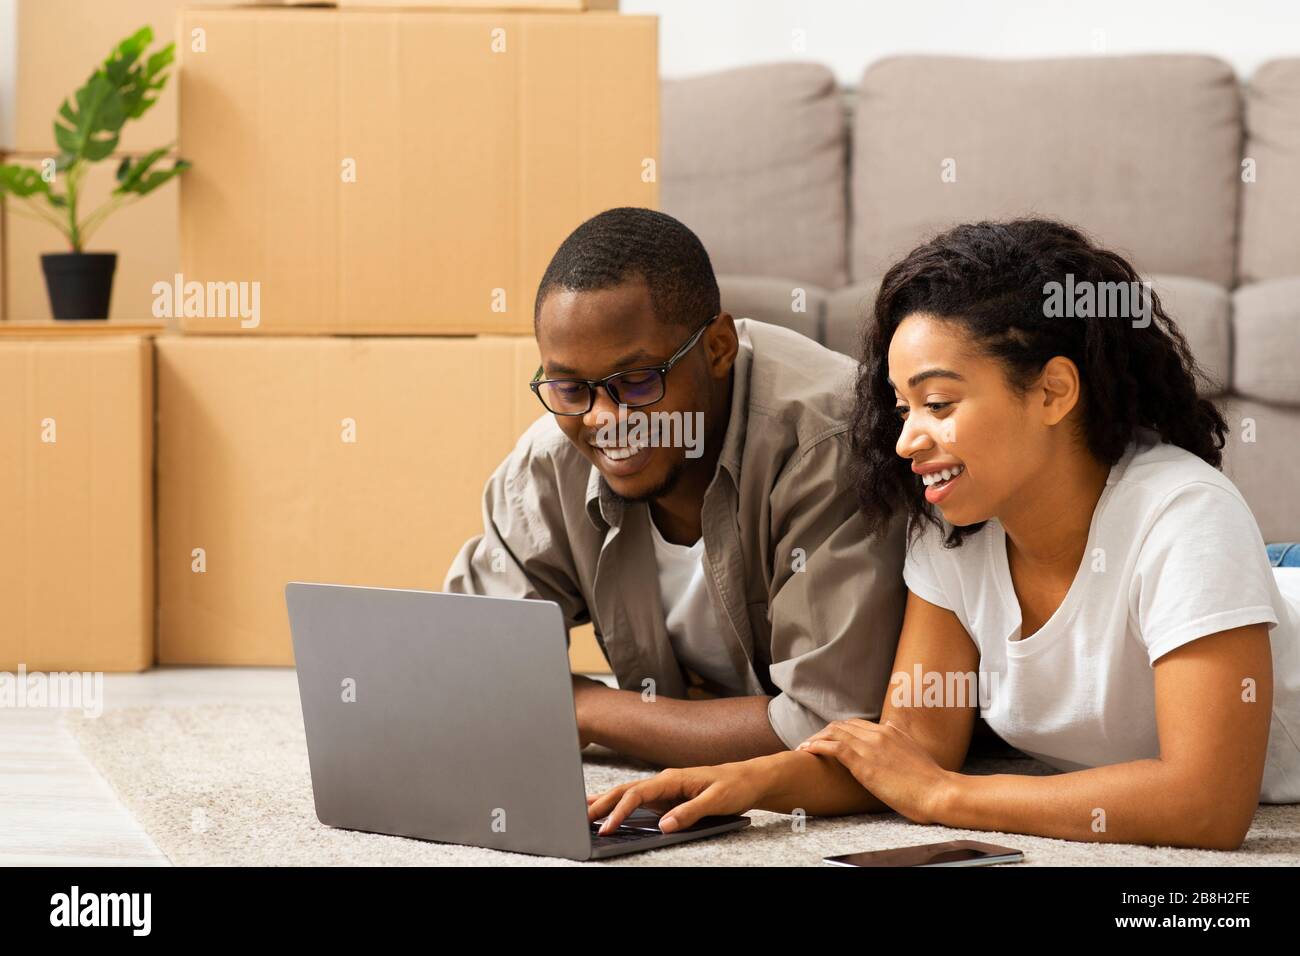 Couple deciding how to design their home with laptop Stock Photo